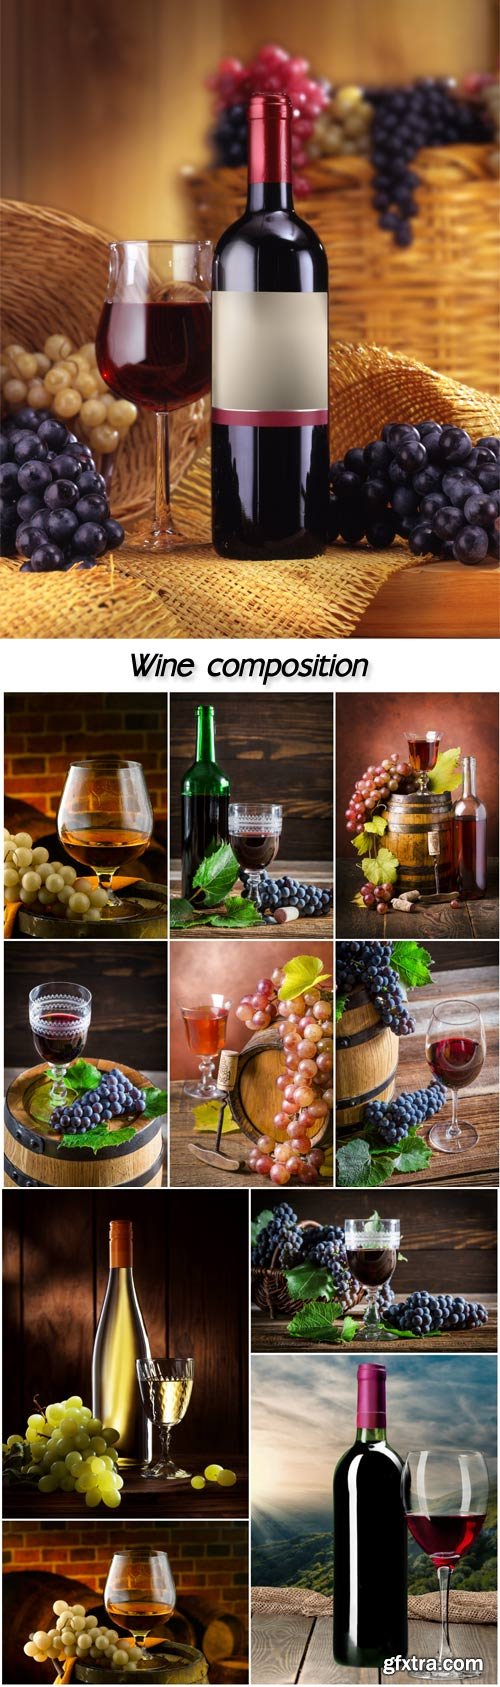 Wine, composition from wine bottles and grapes